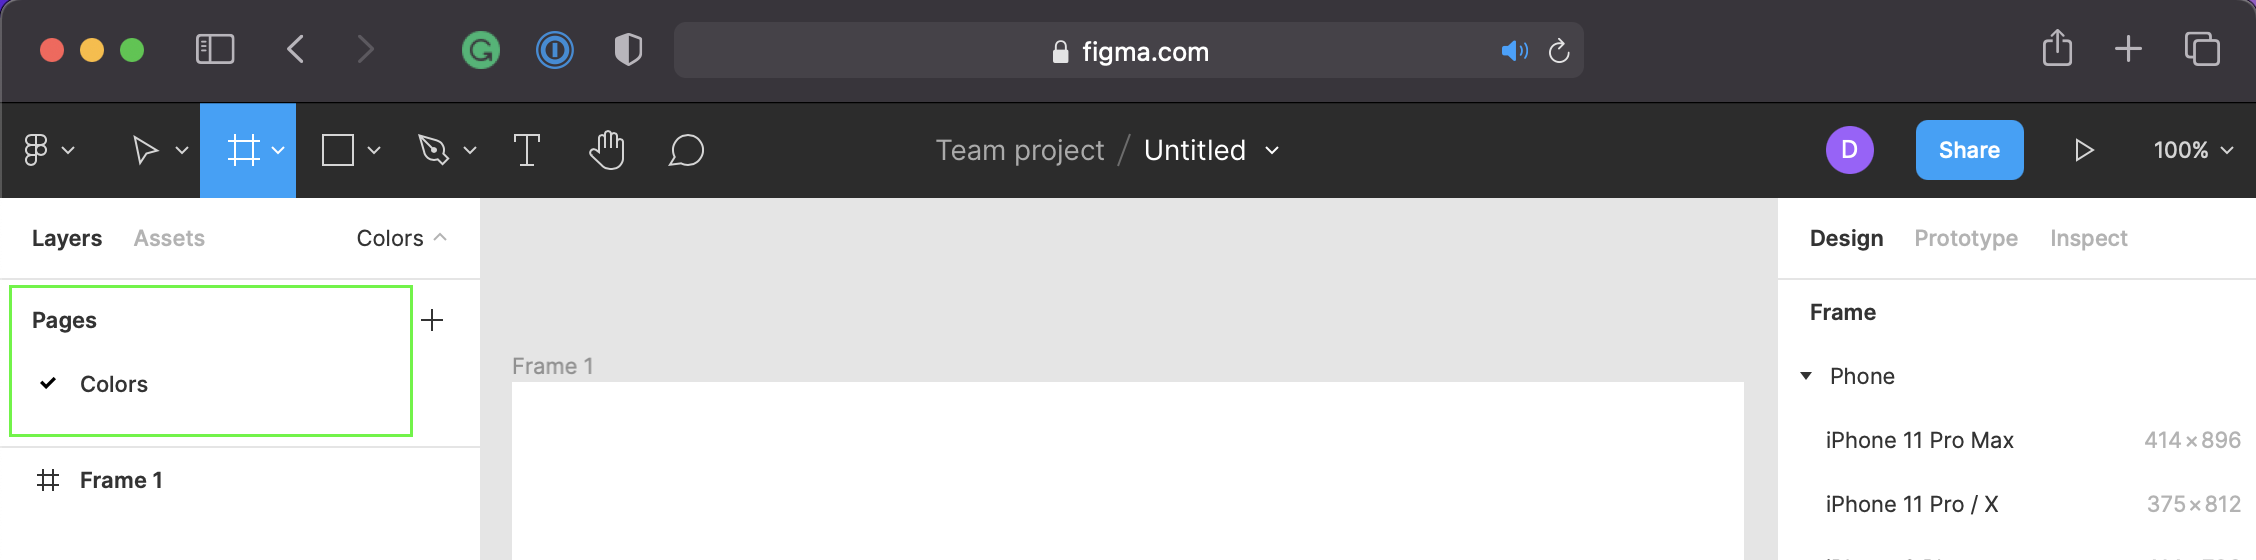 Welcome, Developer - Figma Pages